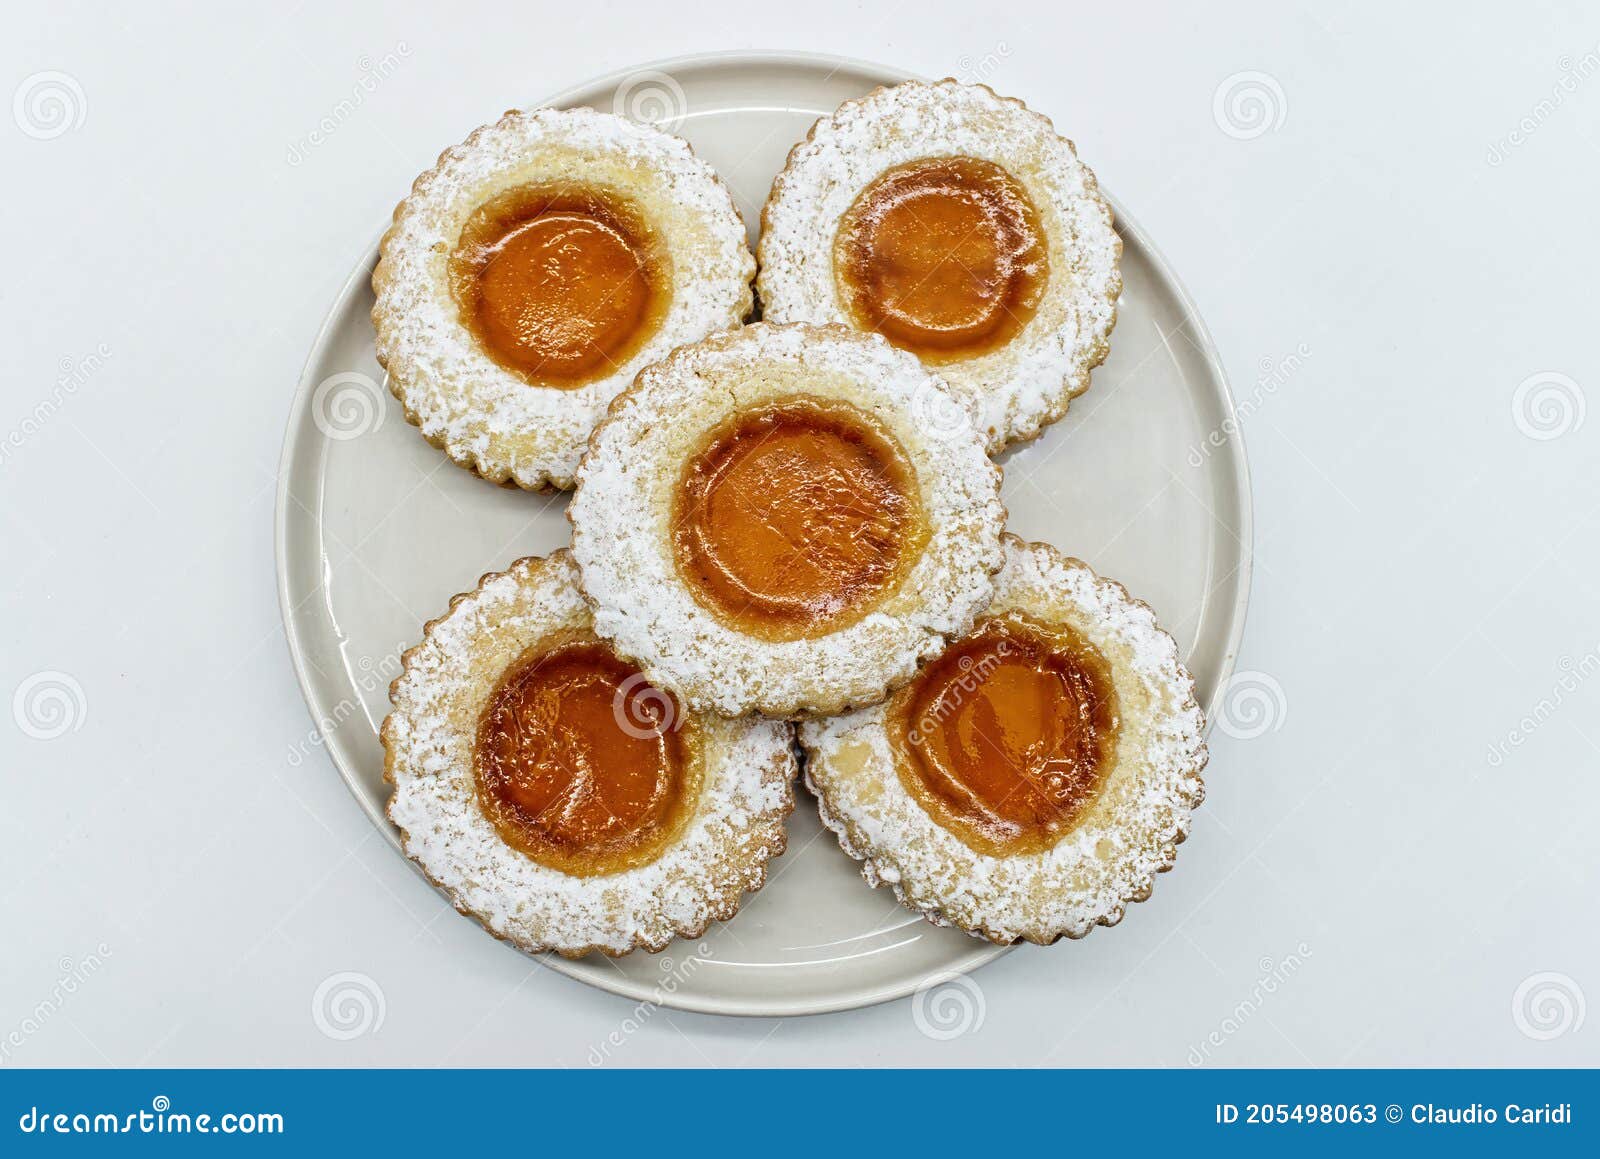 round cookies with fruit jam and icing sugar, italian occhi di bue,  on white